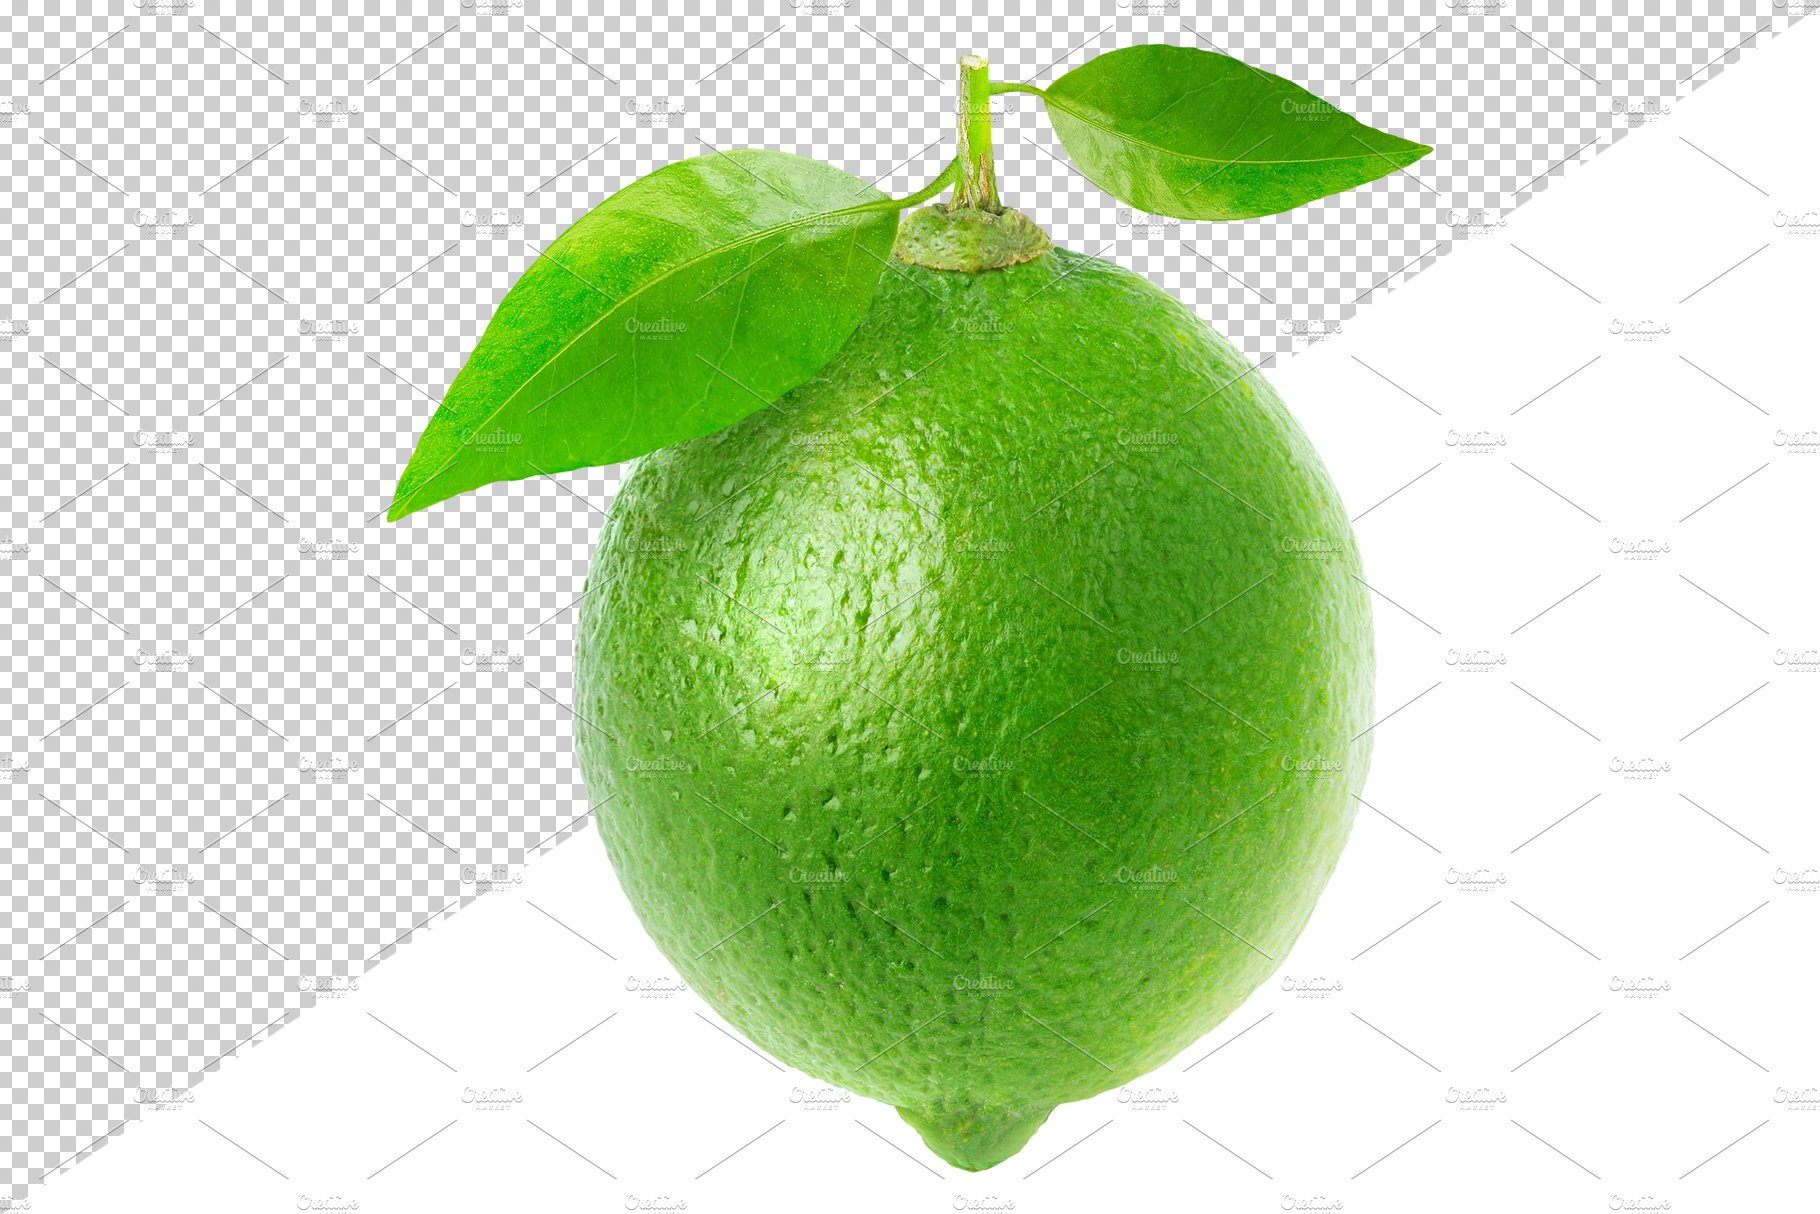 Lime fruit and juice preview image.